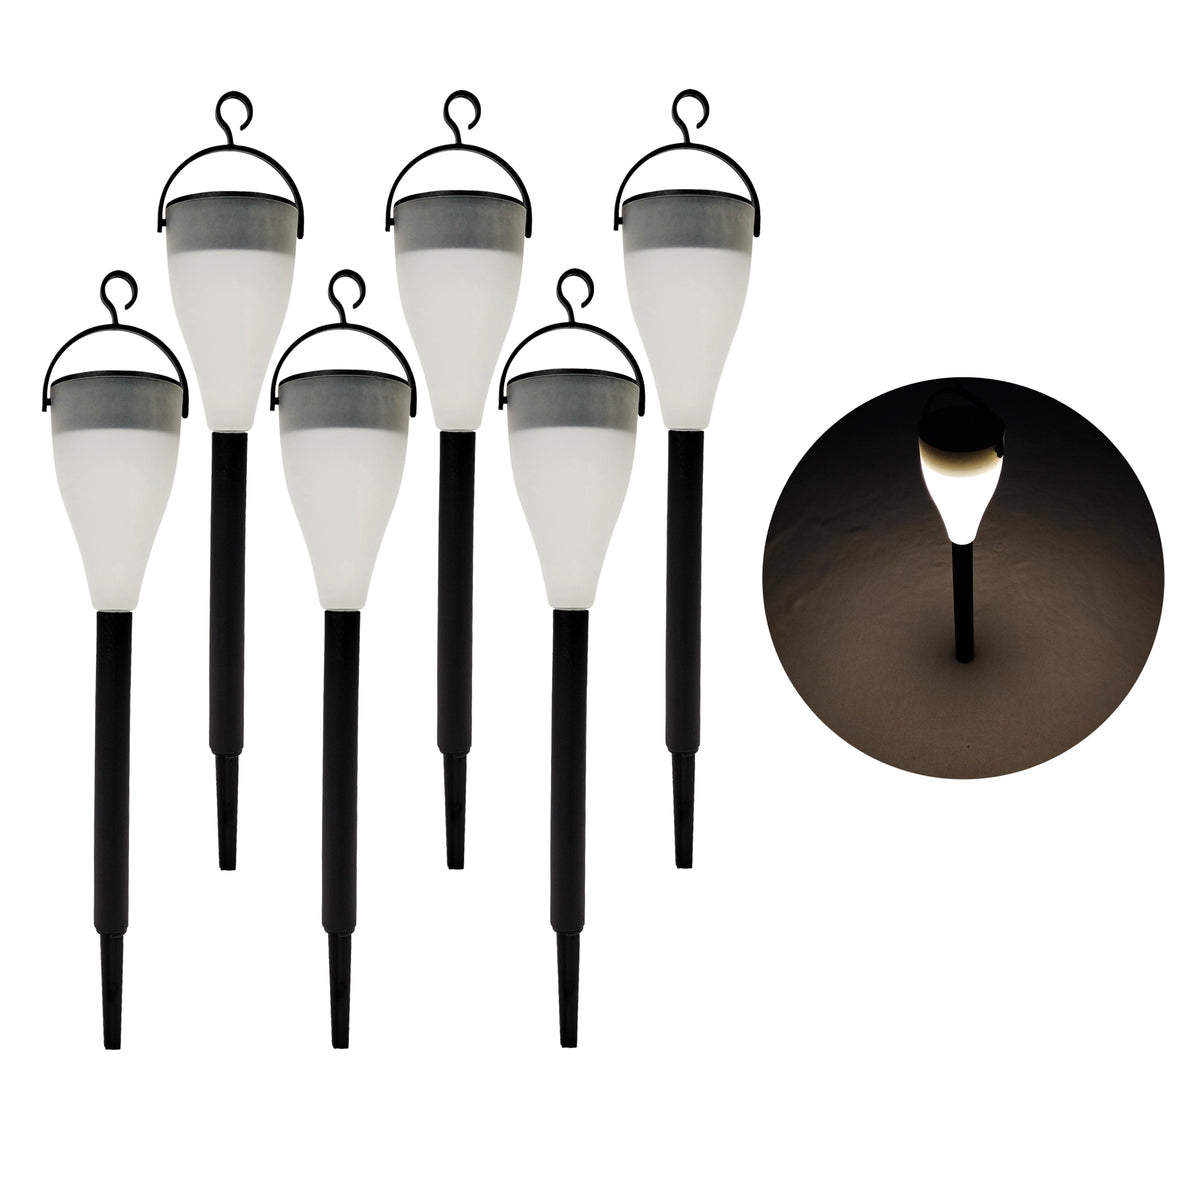 Solar Powered LED Pathway Lights w/ Hanging Hook | 14-in. Tall | 6-Pack | Waterproof IP44